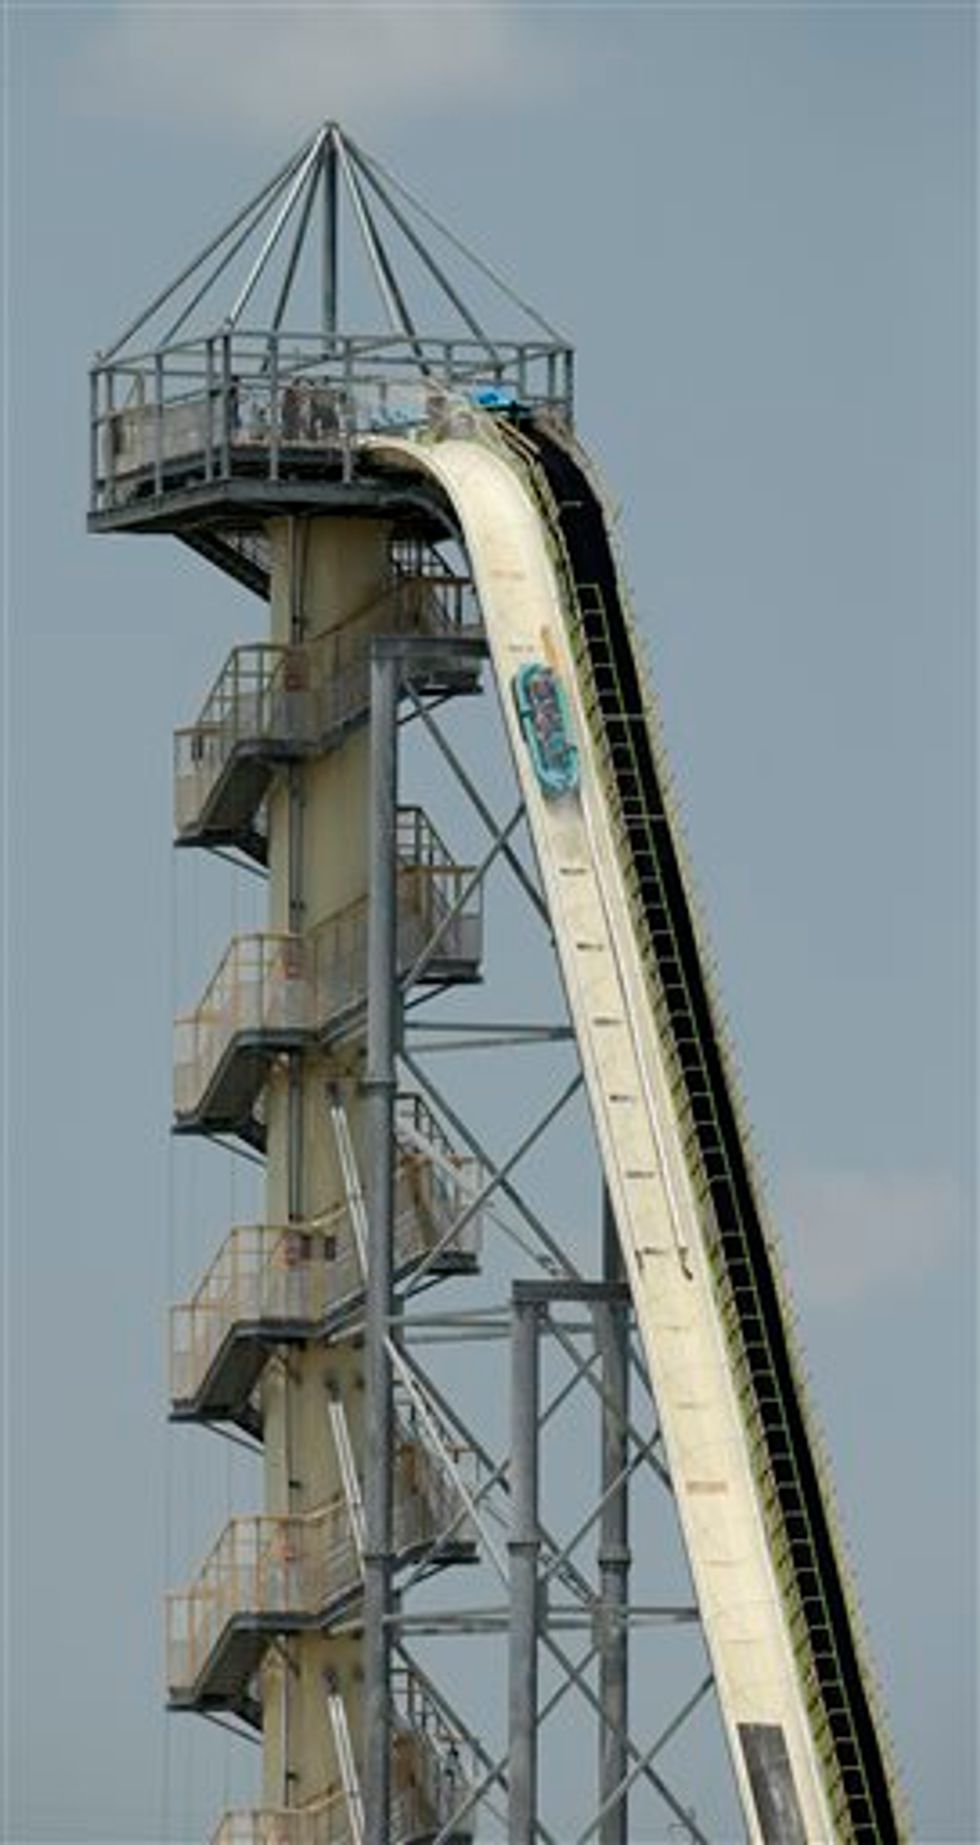 After 10-Year-Old's Death on 'World's Largest' Waterslide, a Look at States' Safety Regulations